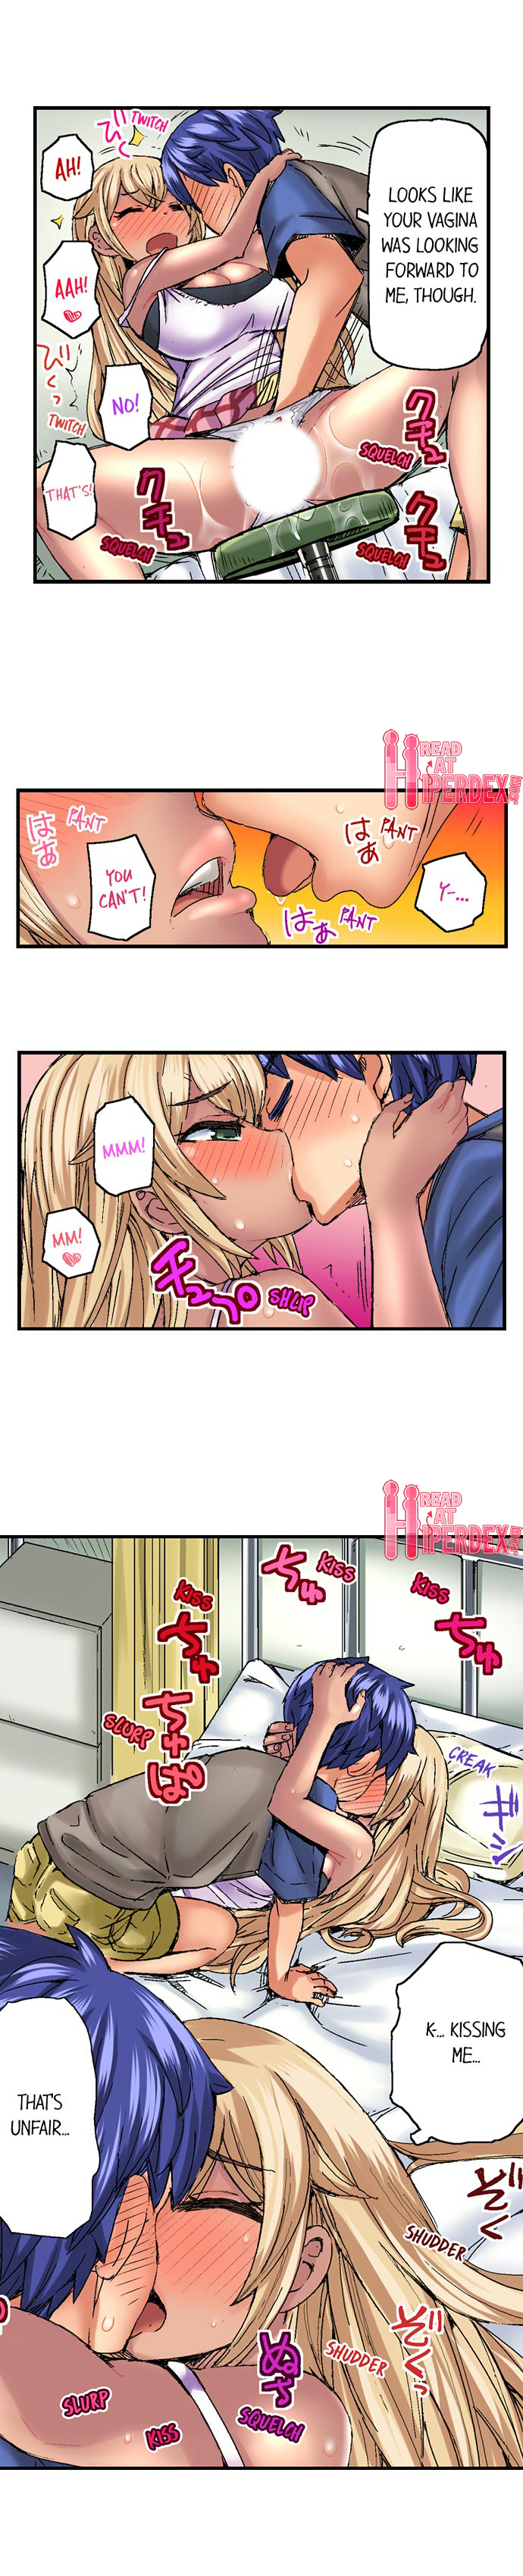 Taking a Hot Tanned Chick’s Virginity - Chapter 15 Page 9